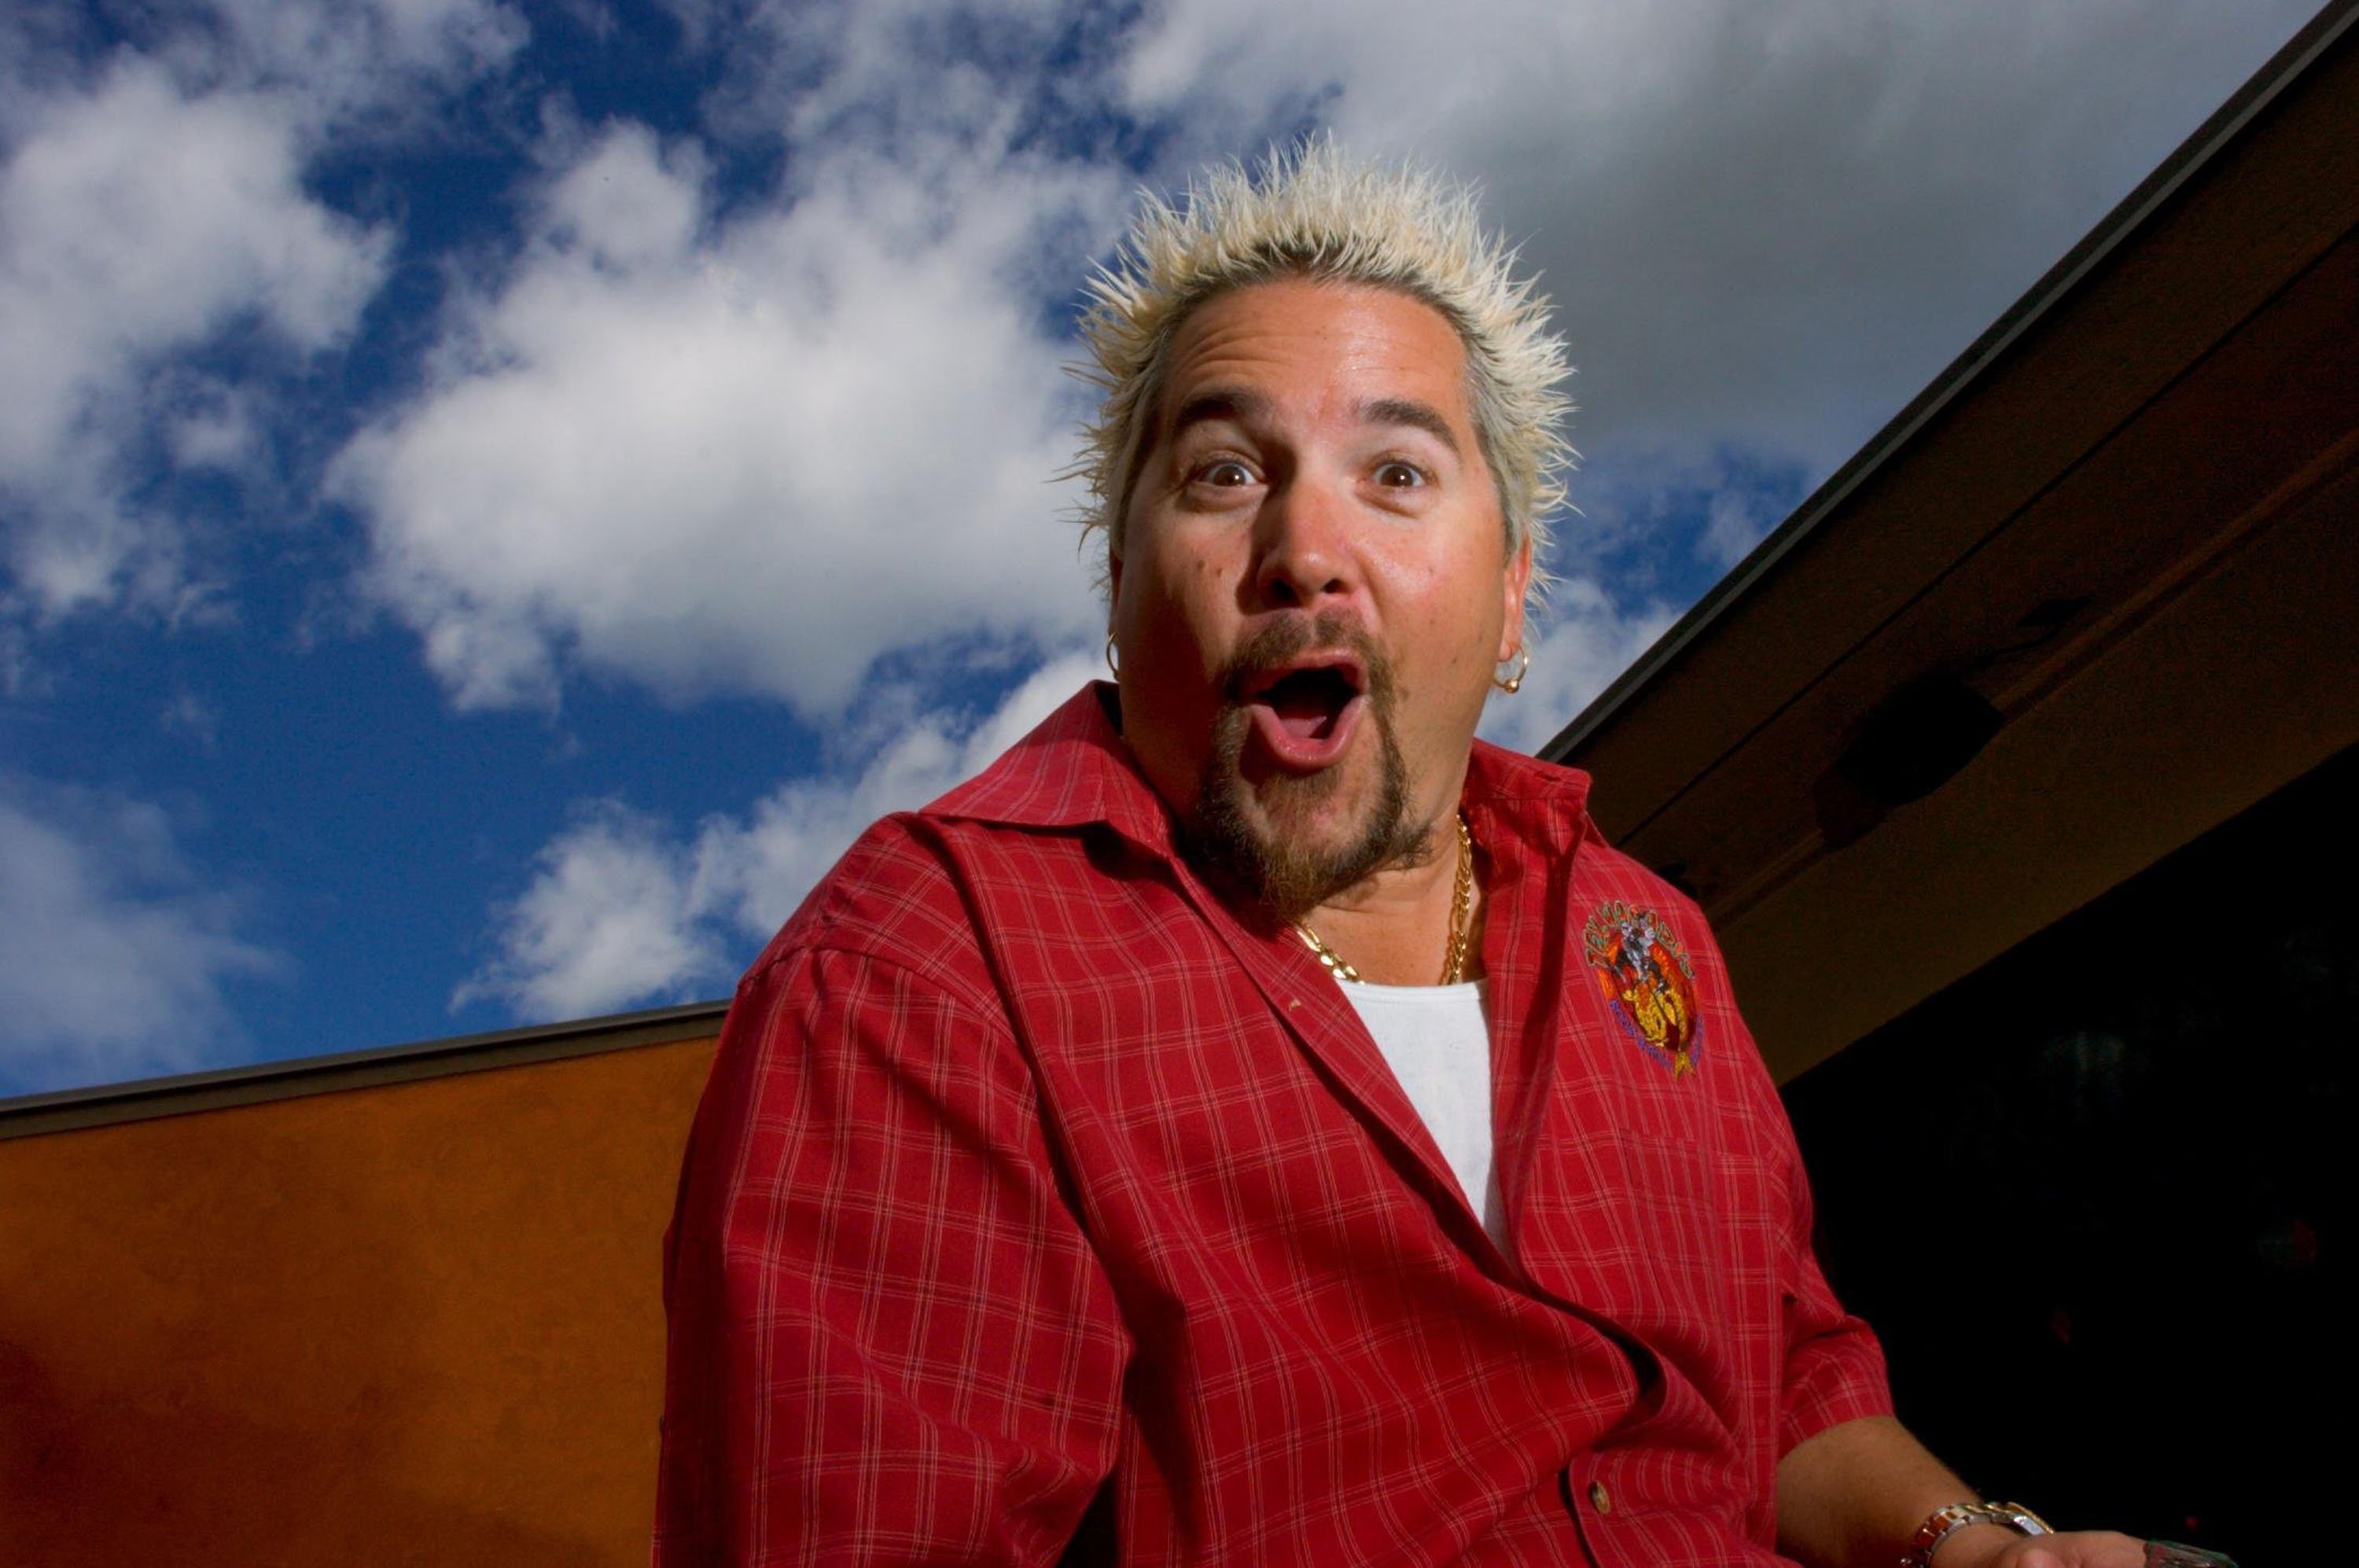 Food Network Is Changing the Format of ‘Diners, Drive-Ins, and Dives’ and ‘Guy’s Grocery Games’